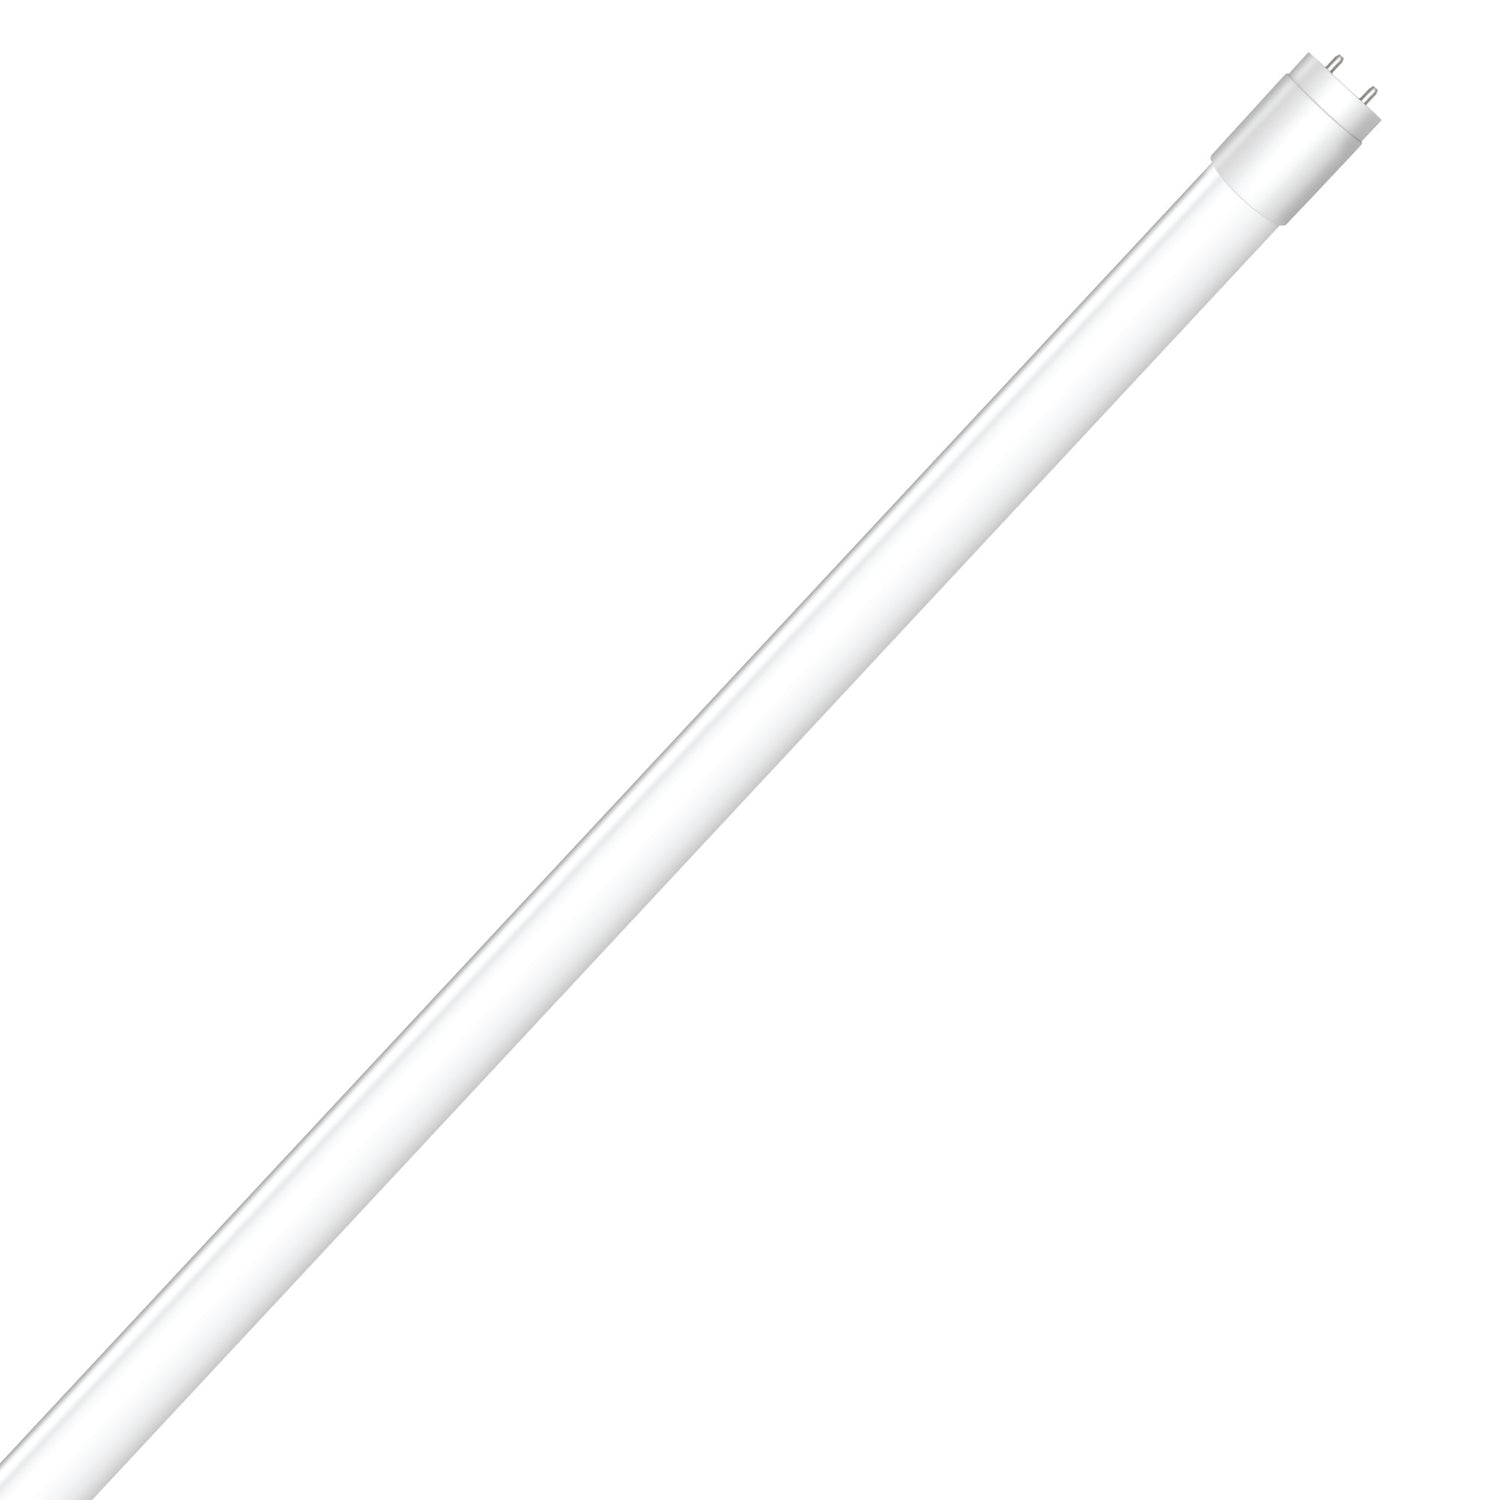 4 ft. 18W (32W Replacement) Cool White (4000K) G13 Base (T8/T12 Replacement) Ballast Bypass (Type B) LED Linear Tube (10-Pack)